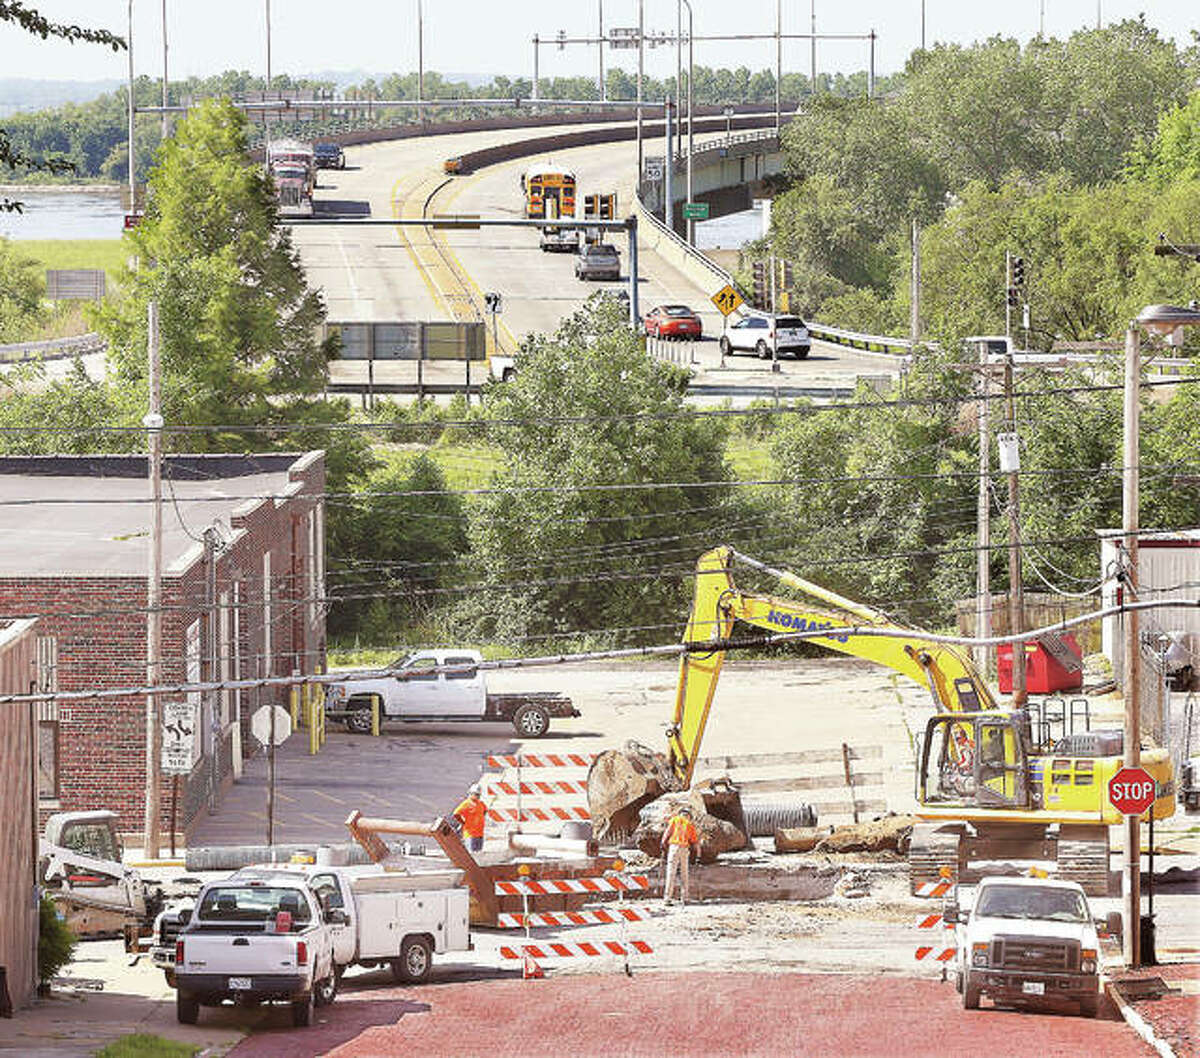 The sewer project down the center of East Broadway in Alton is moving westward, as seen here at Oak Street in alignment with the Clark Bridge this week. The work has closed Broadway as it moves to the west, most recently closing it from Central Avenue west to Spring Street.